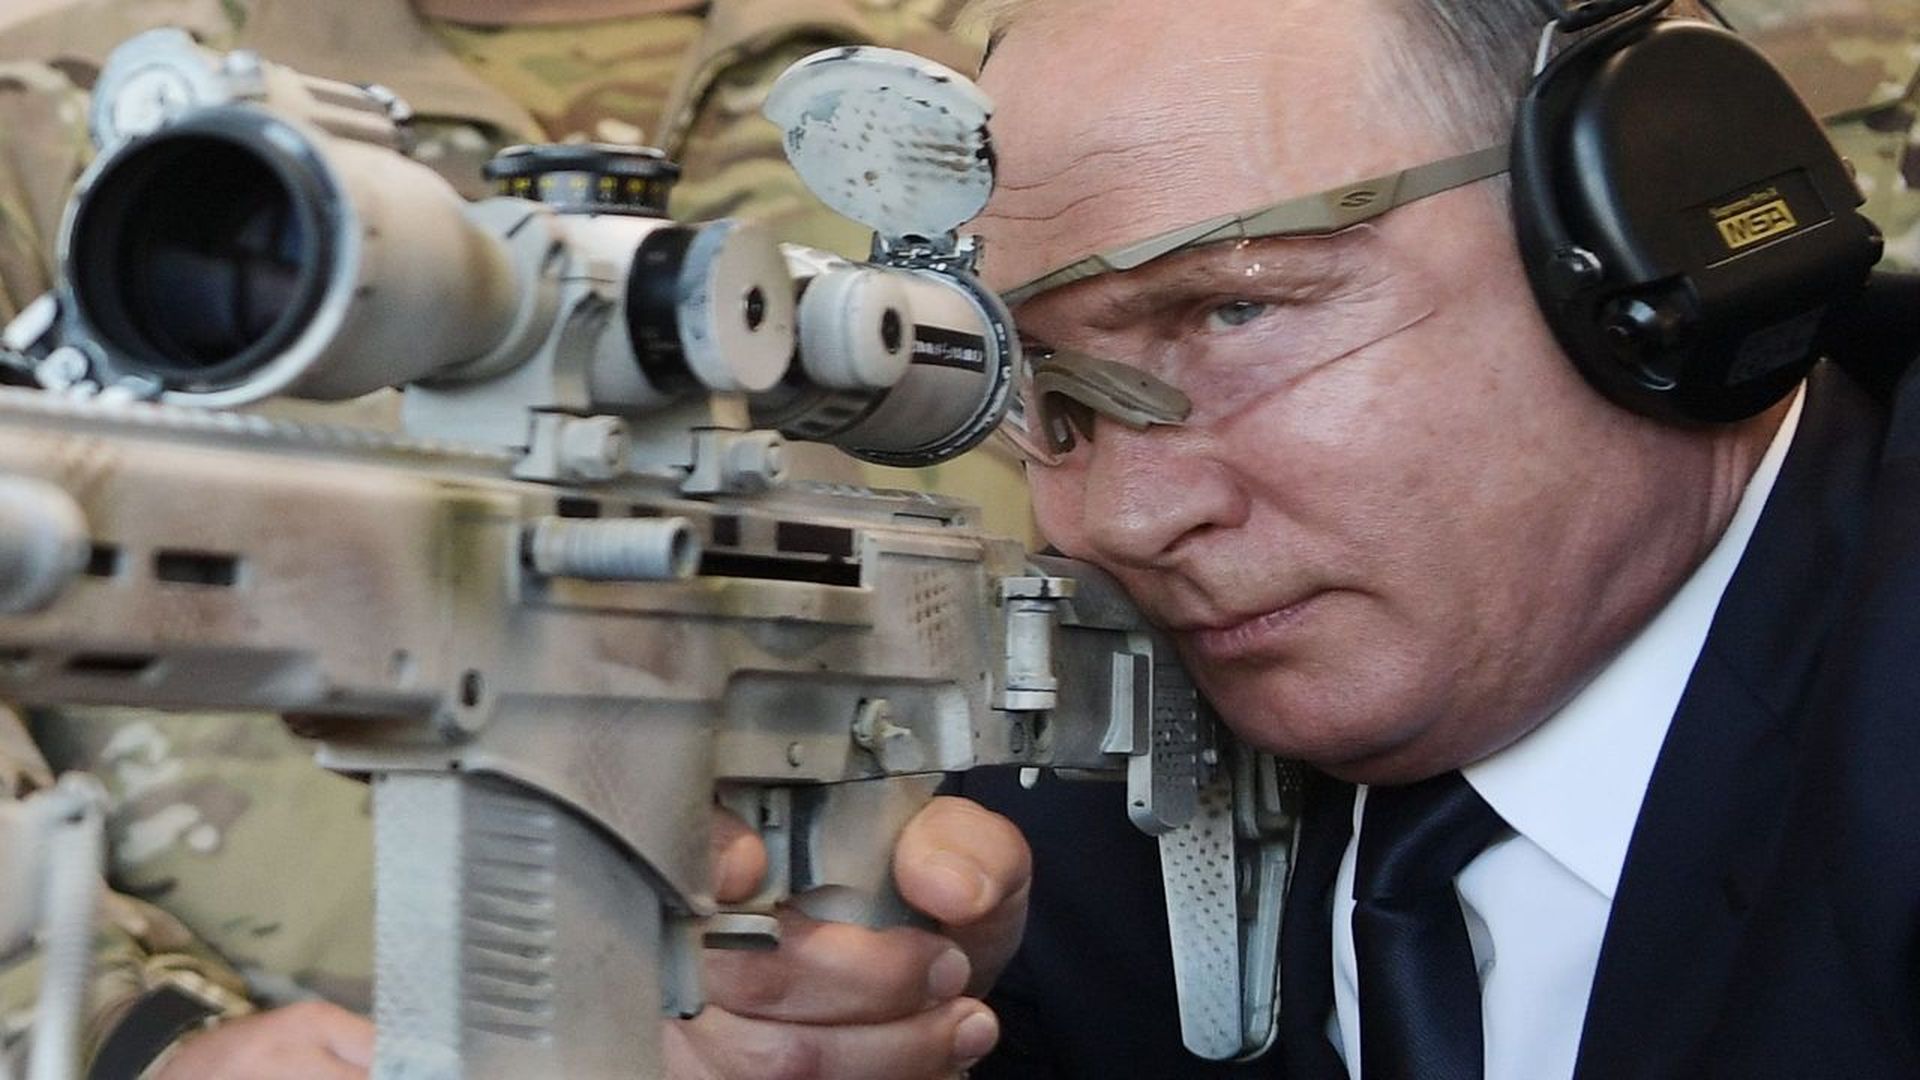 Vladimir Putin shoots an advanced Kalashnikov sniper rifle during a visit to the military-themed Patriot Park outside Moscow, in September. Photo: Alexey Nikolsky/AFP/Getty Images